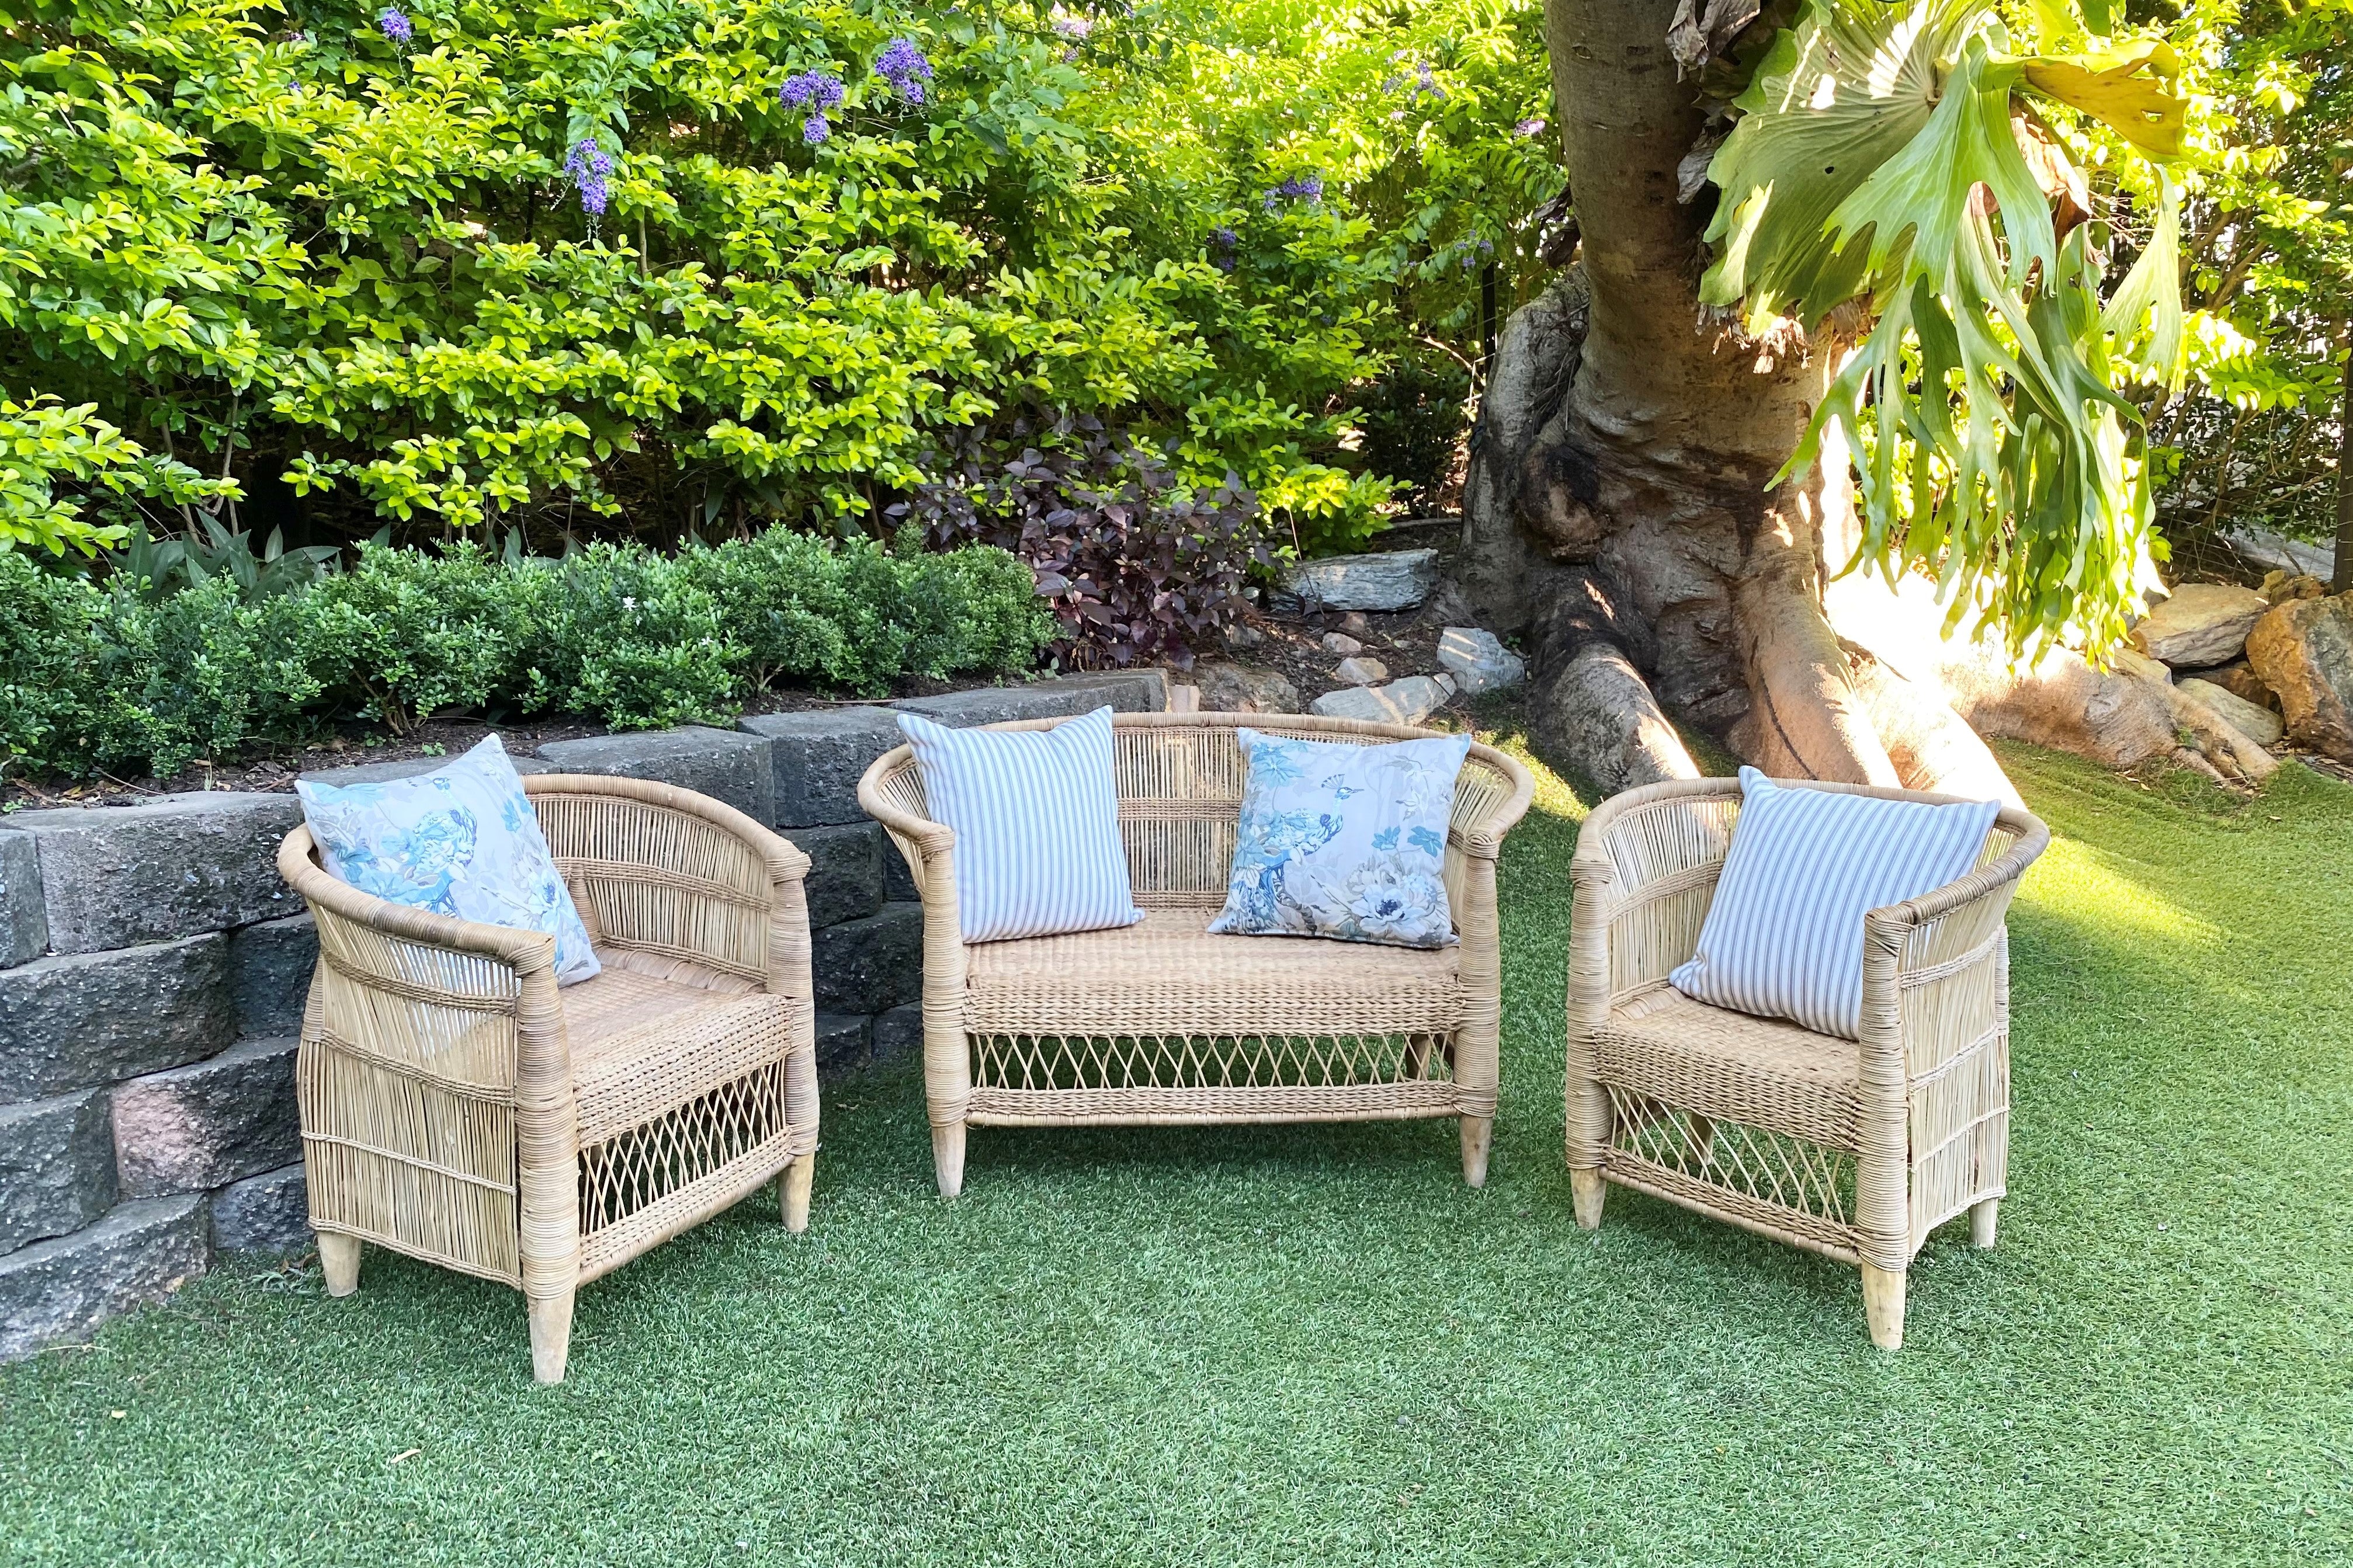 Authentic handmade Malawi arm chairs sit on either side of Malawi two seater chair